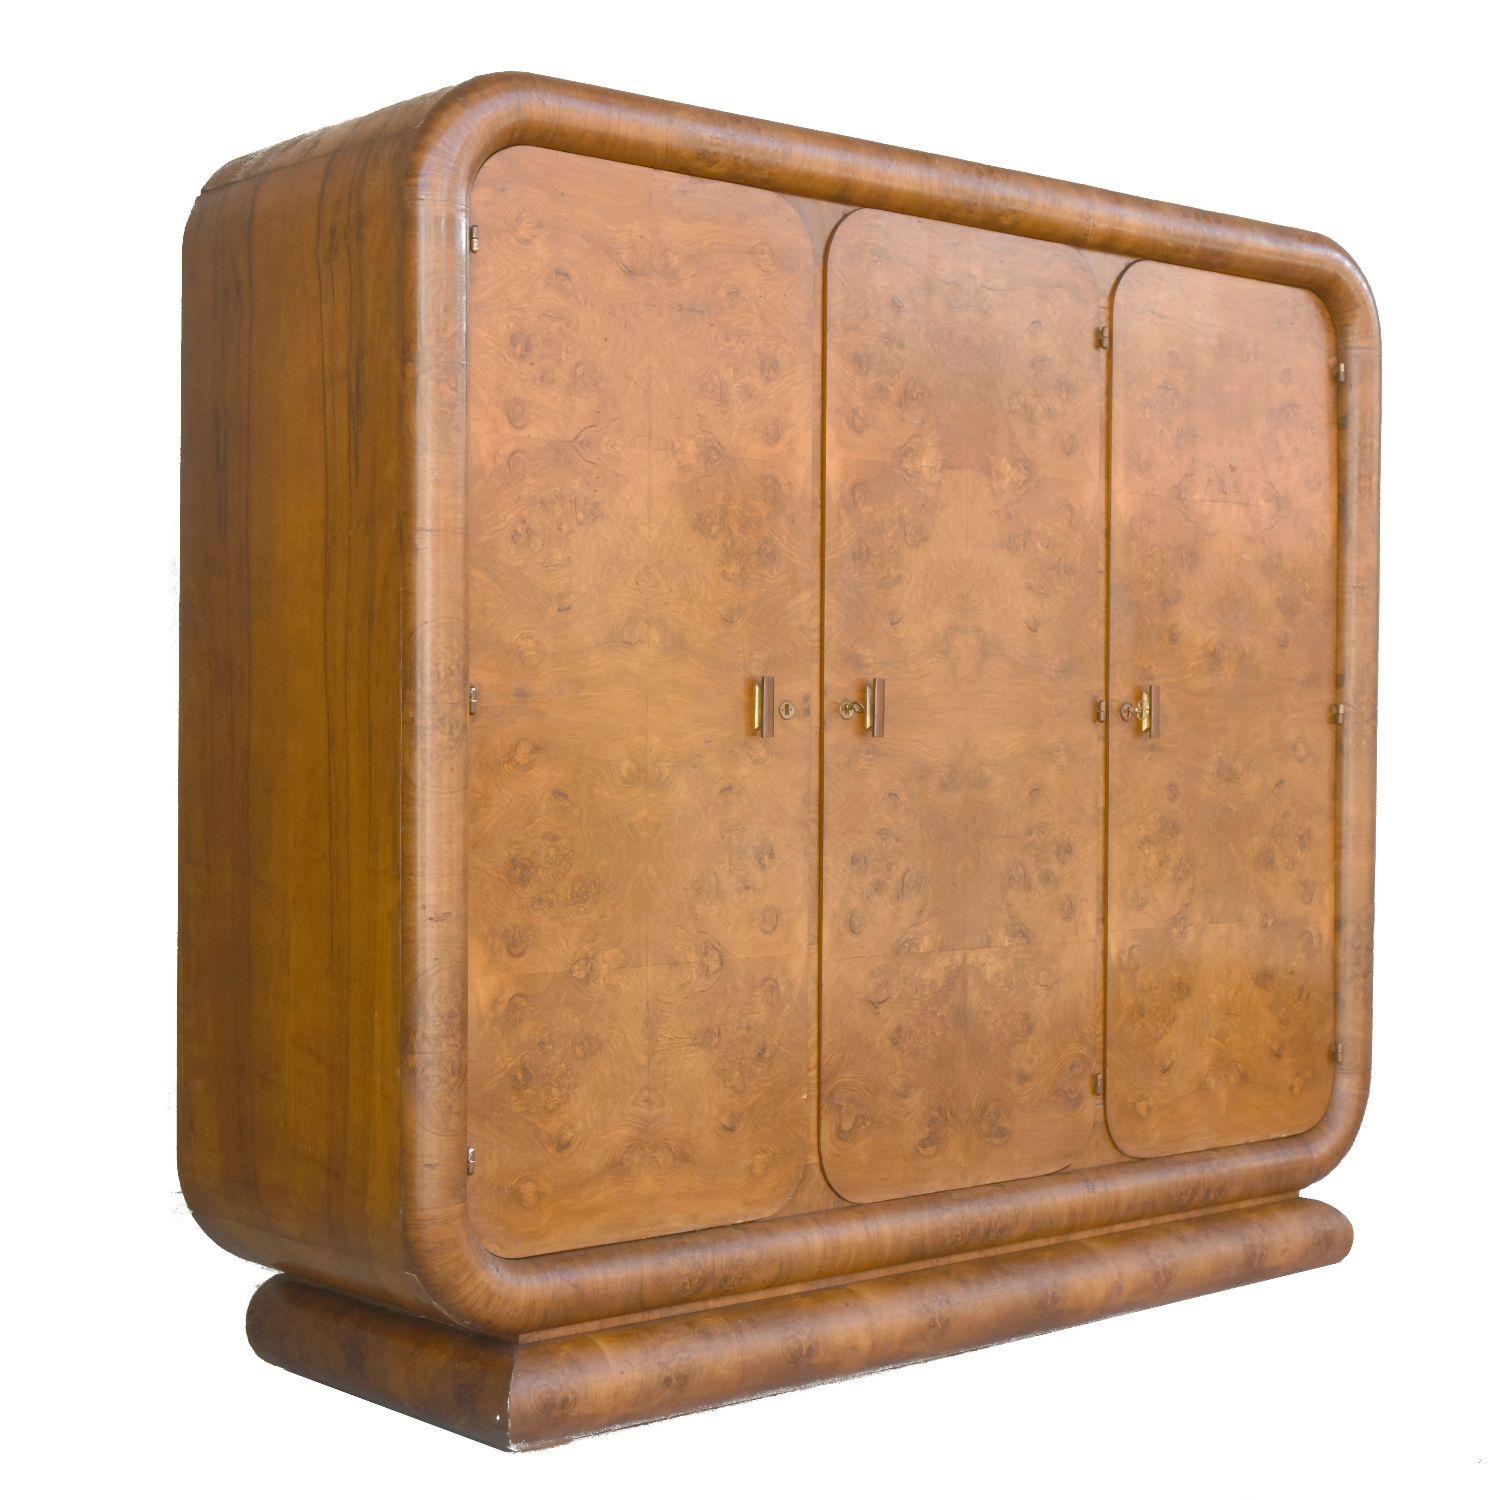 Hollywoodian style wardrobe from the 1930s Art Deco period in walnut burl with amazing shapes, height 186 cm, width 210 cm and 64 cm deep.